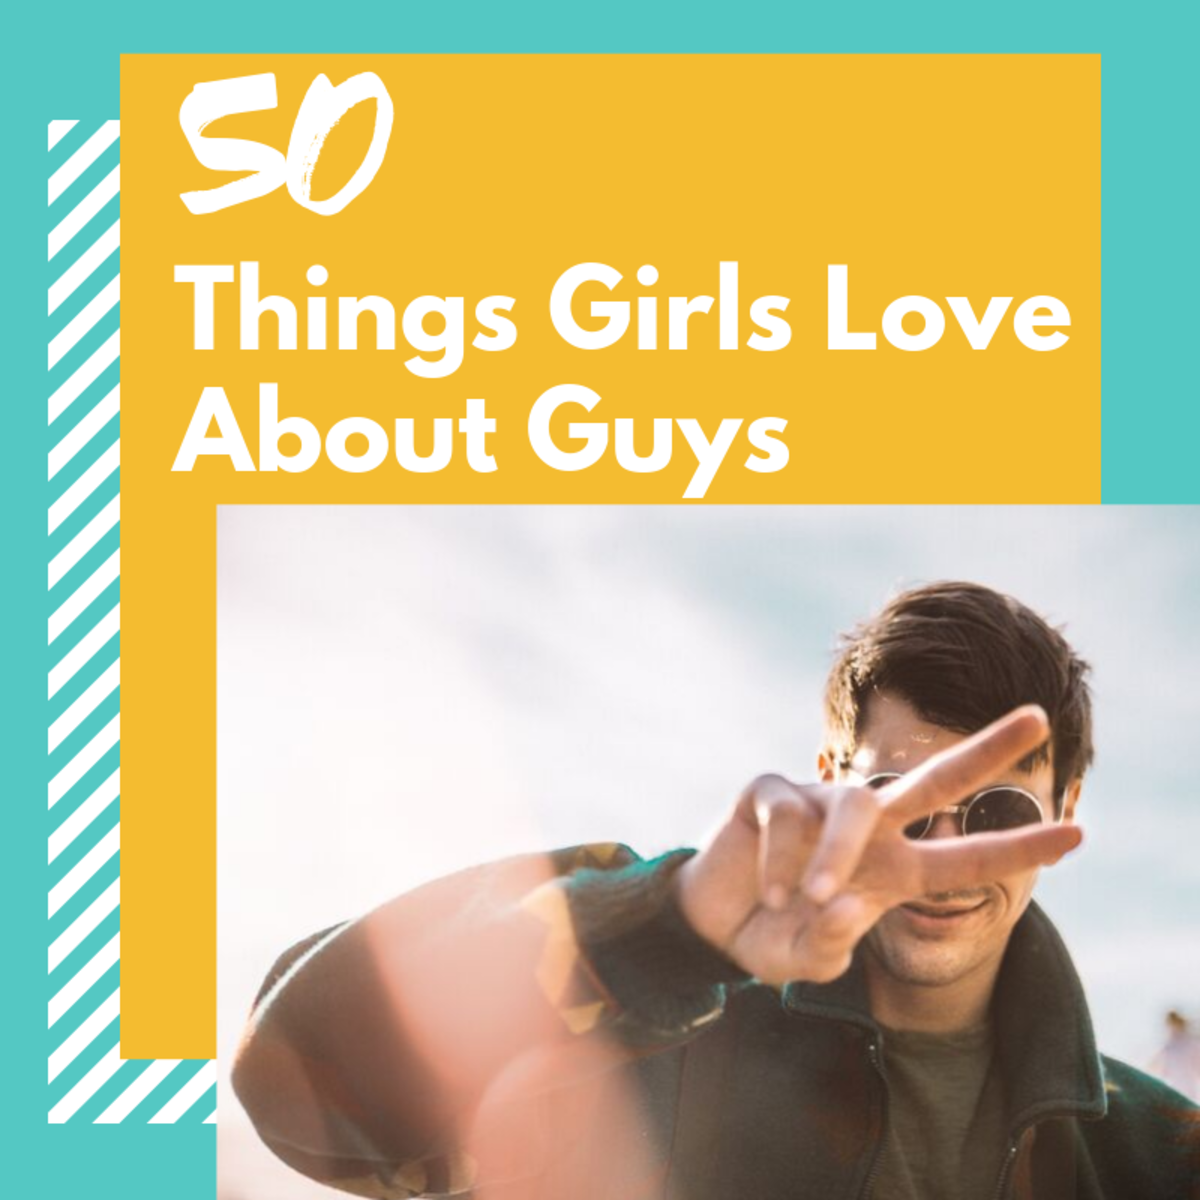 Hear girlfriends guys want to their things from 25 Things